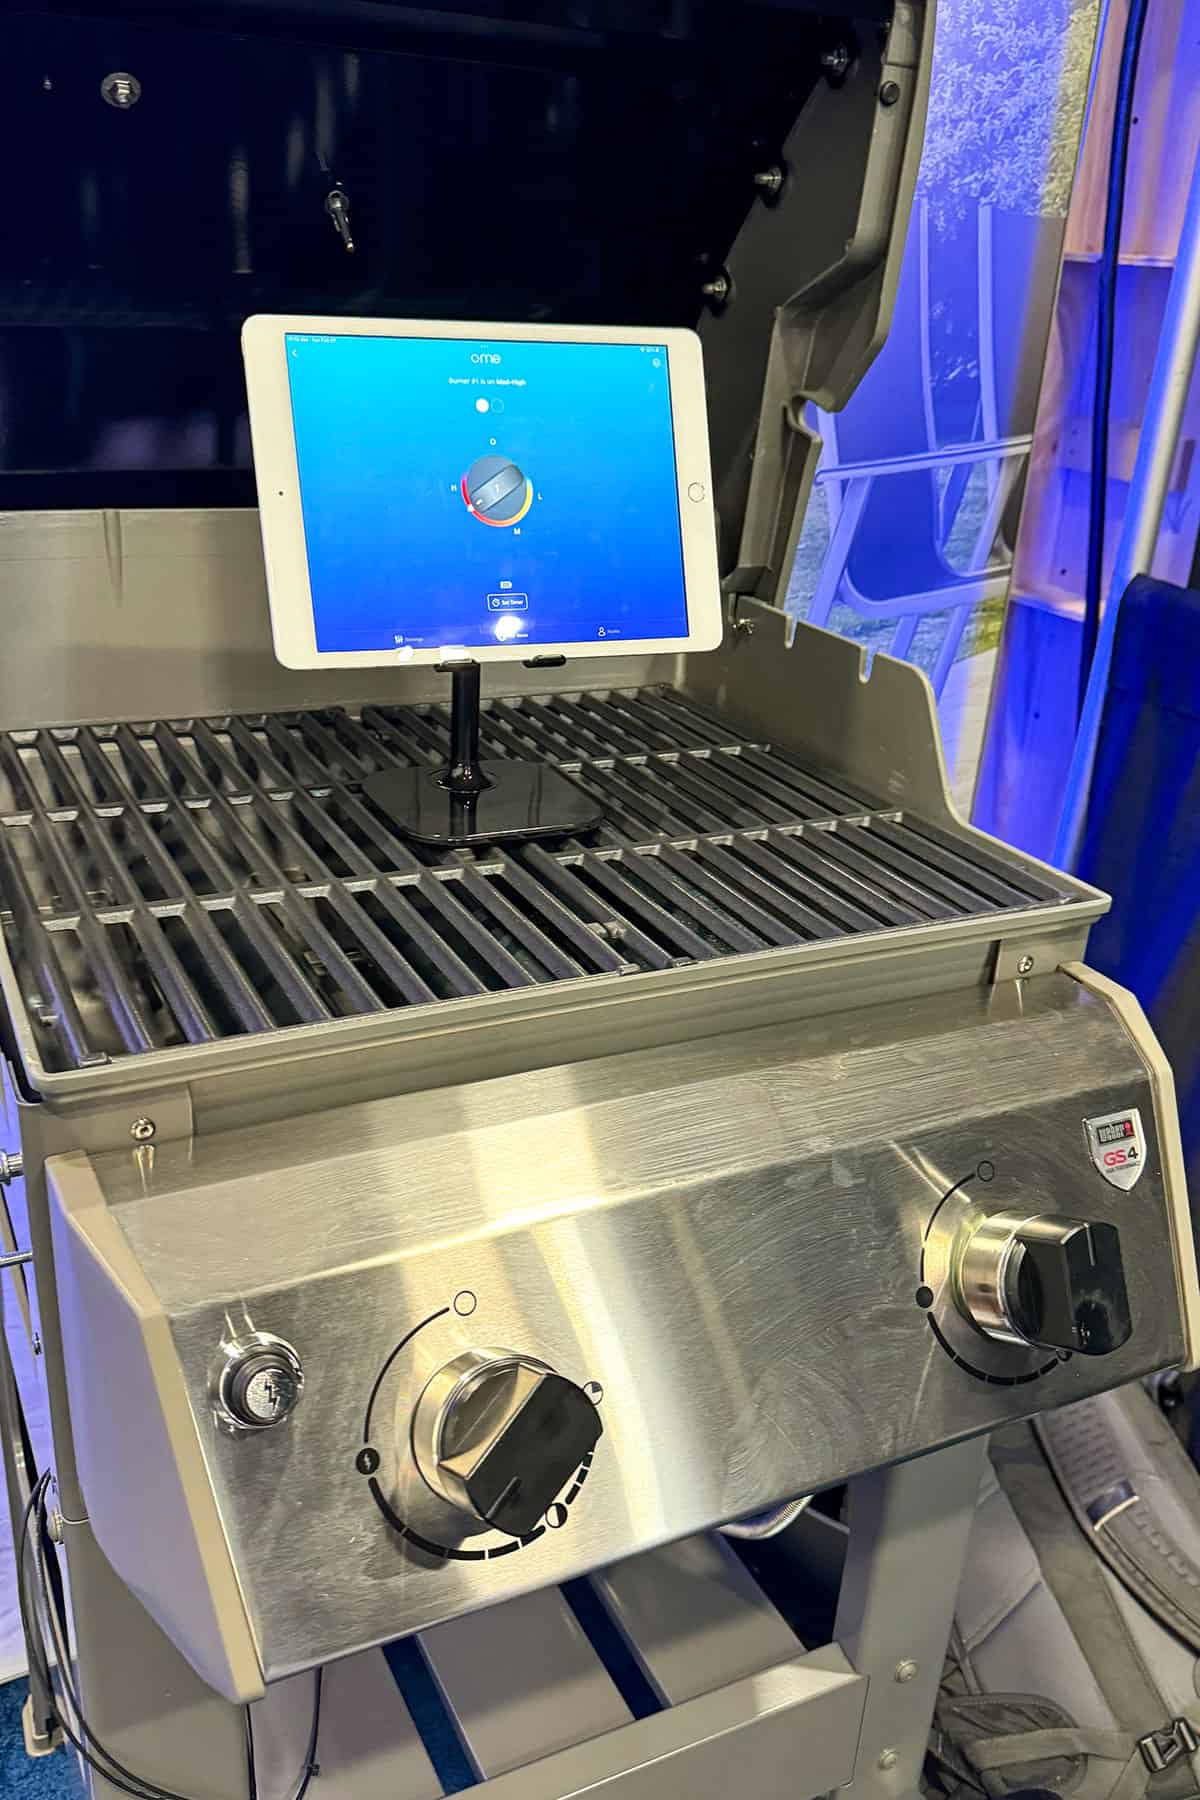 Ome Kitchen Knob on gas grill with tablet showing app.